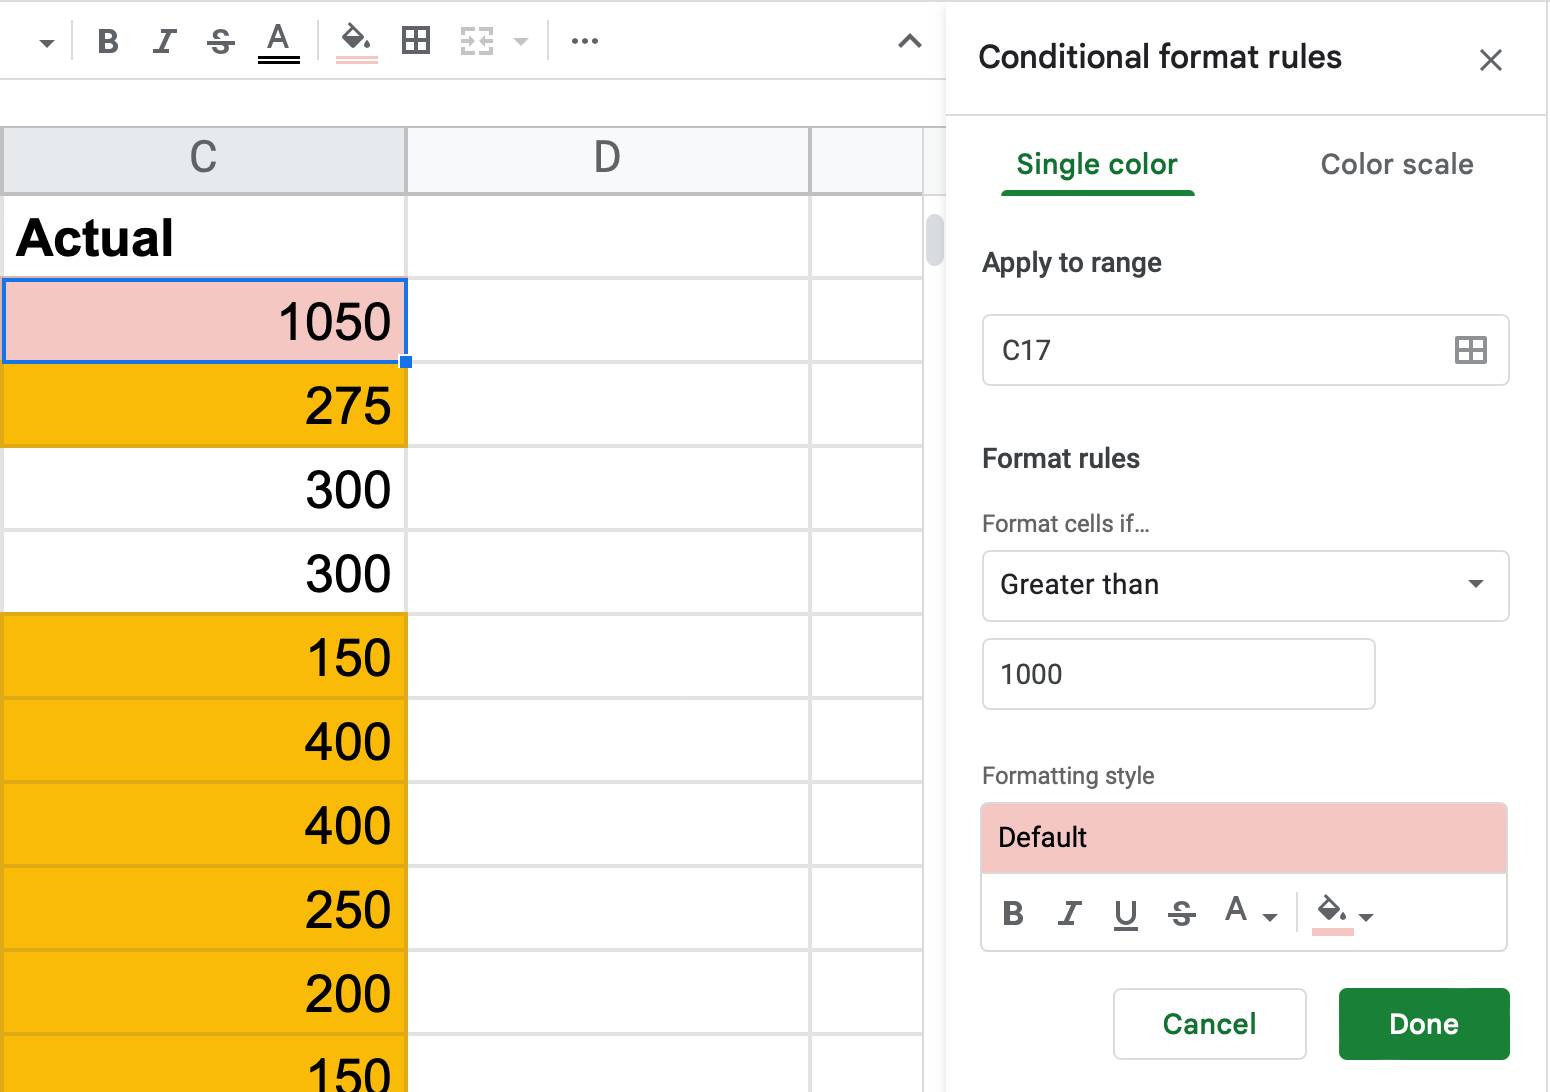 Example conditional formatting for budgeting with irregular
income